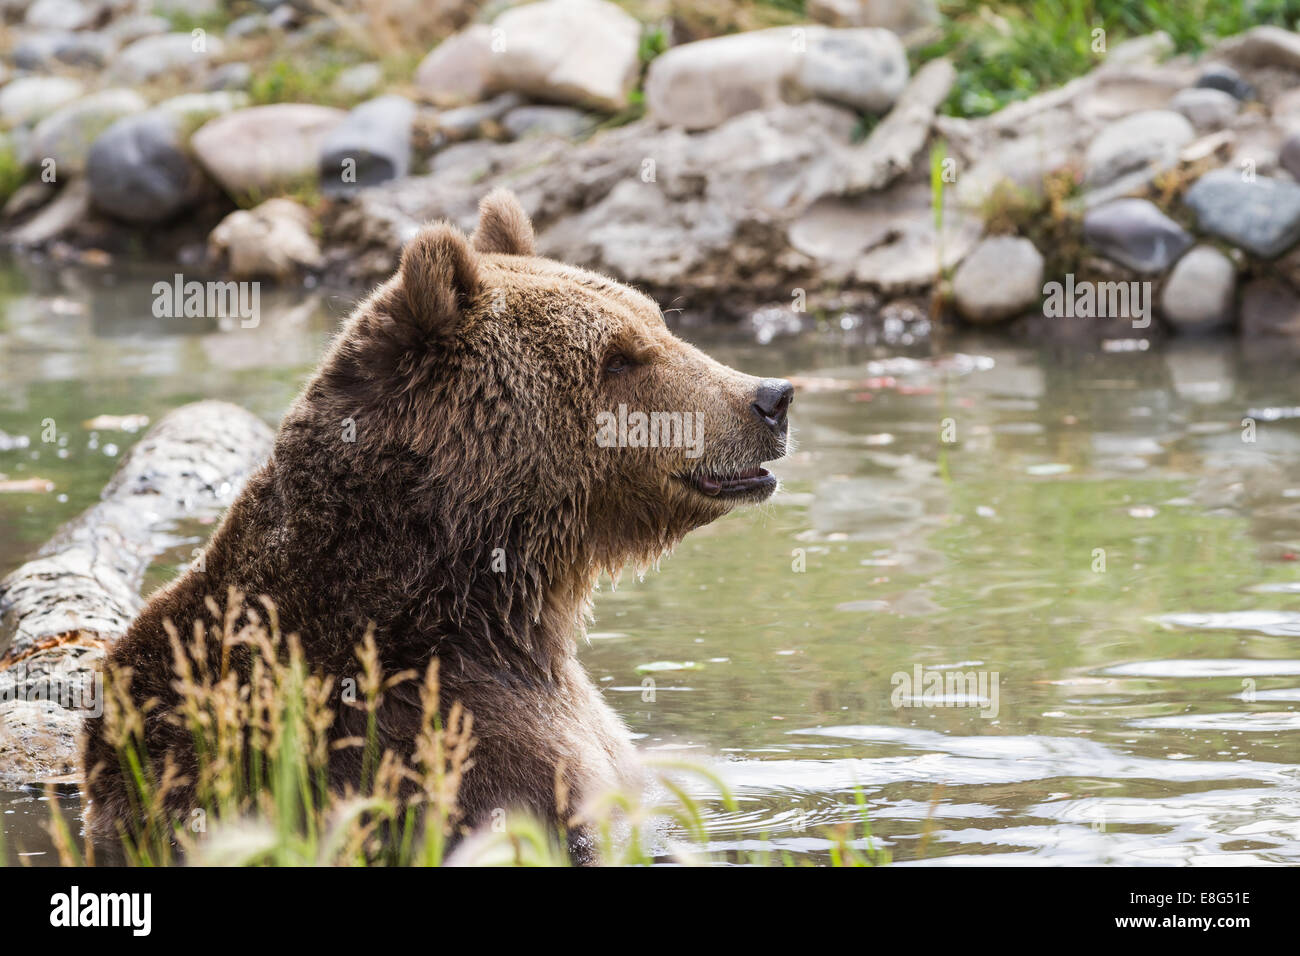 adult grizzly bear enjoying time in a pond filled with water Stock Photo